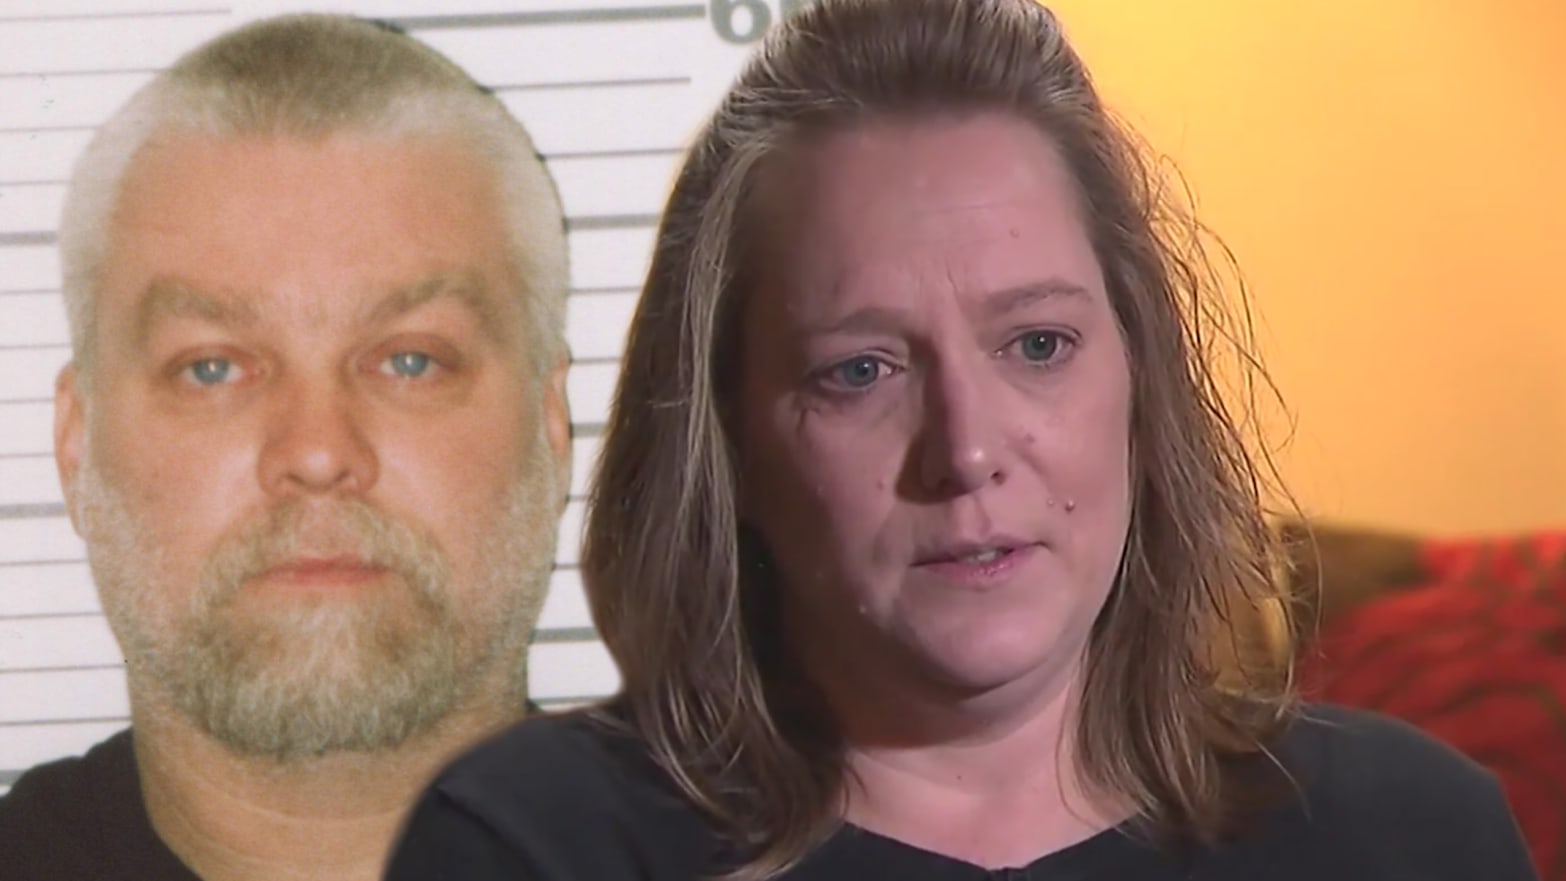 Steven Avery demanded 'four hour sex sessions' from ex-fiancée